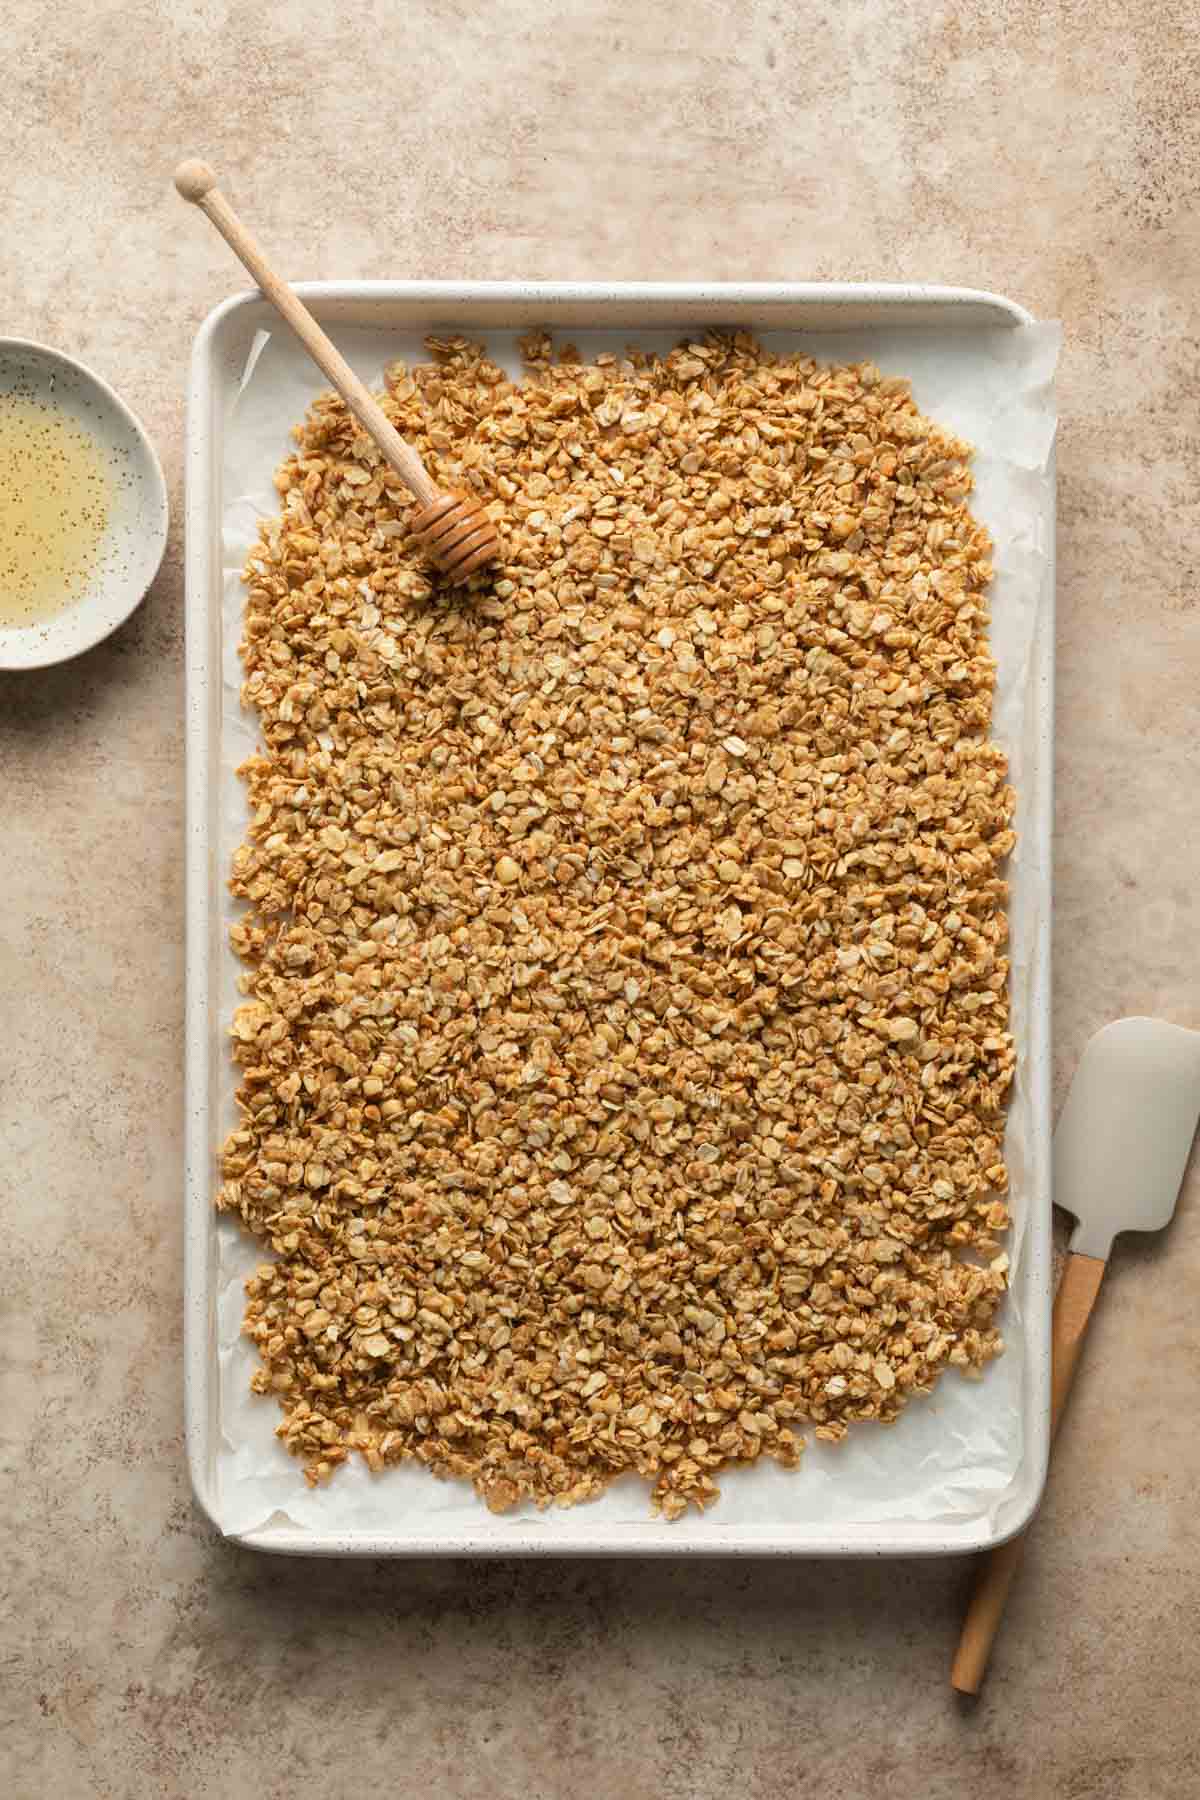 Granola mixture spread out on a white baking sheet.